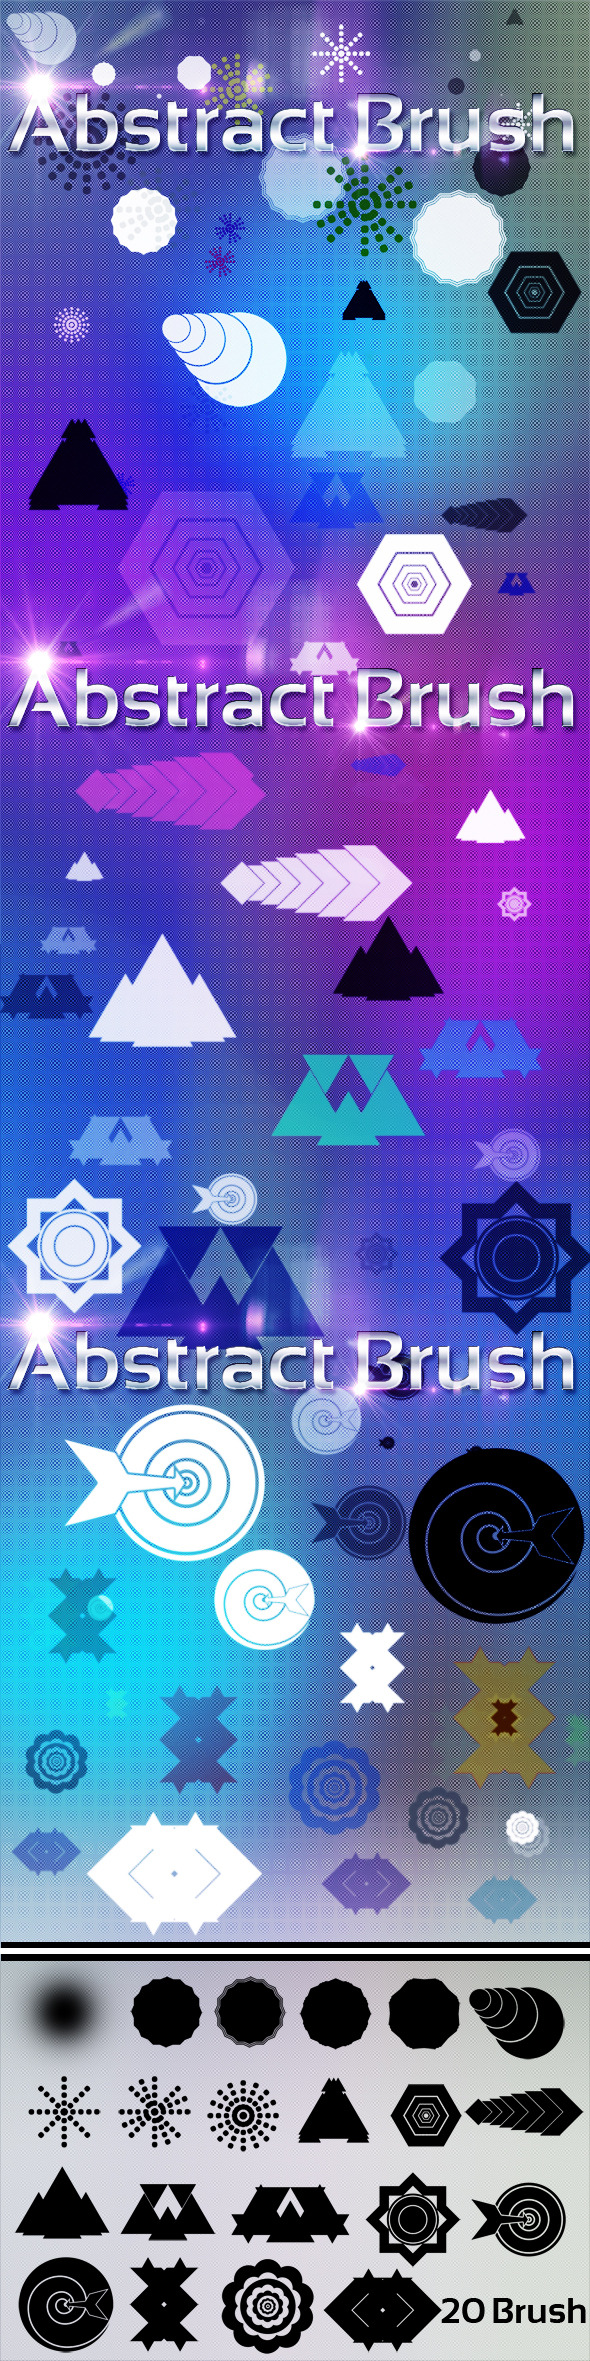 20 Abstract Brush